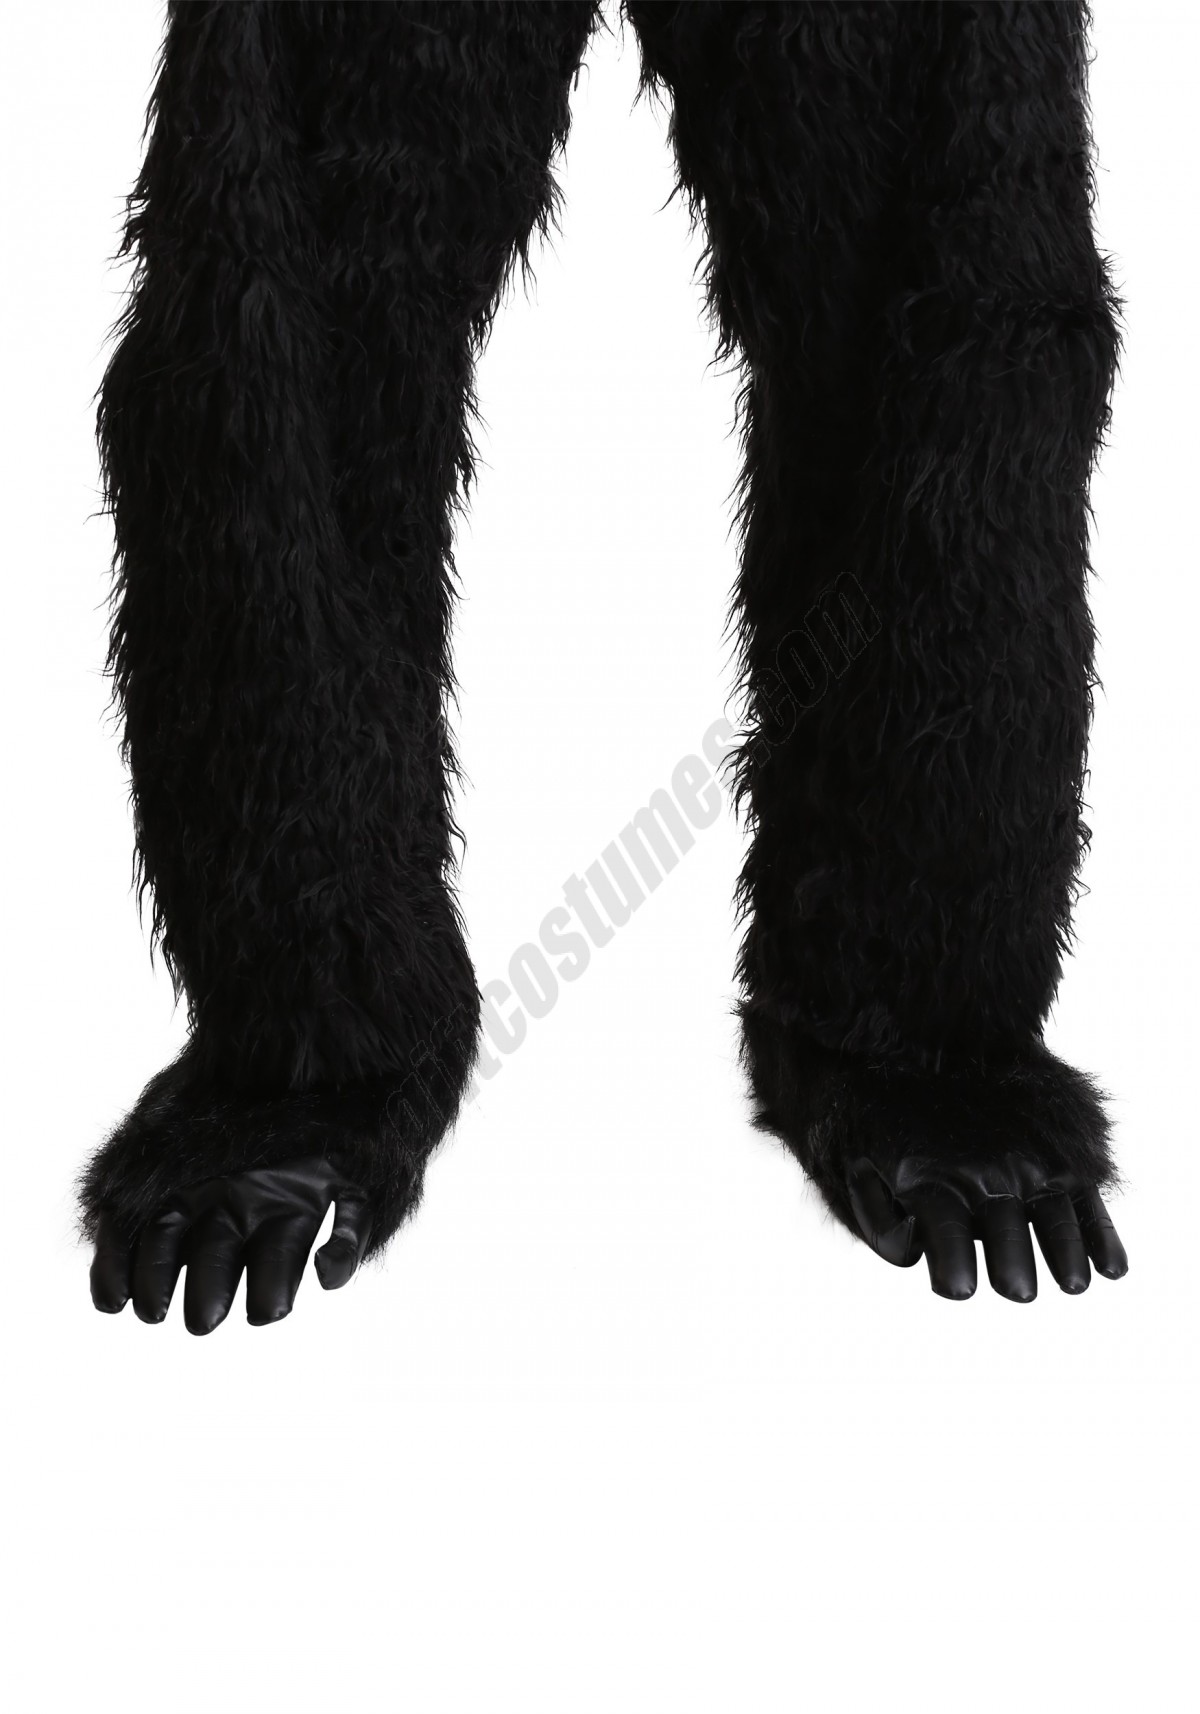 Adult Gorilla Shoe Covers Promotions - -0